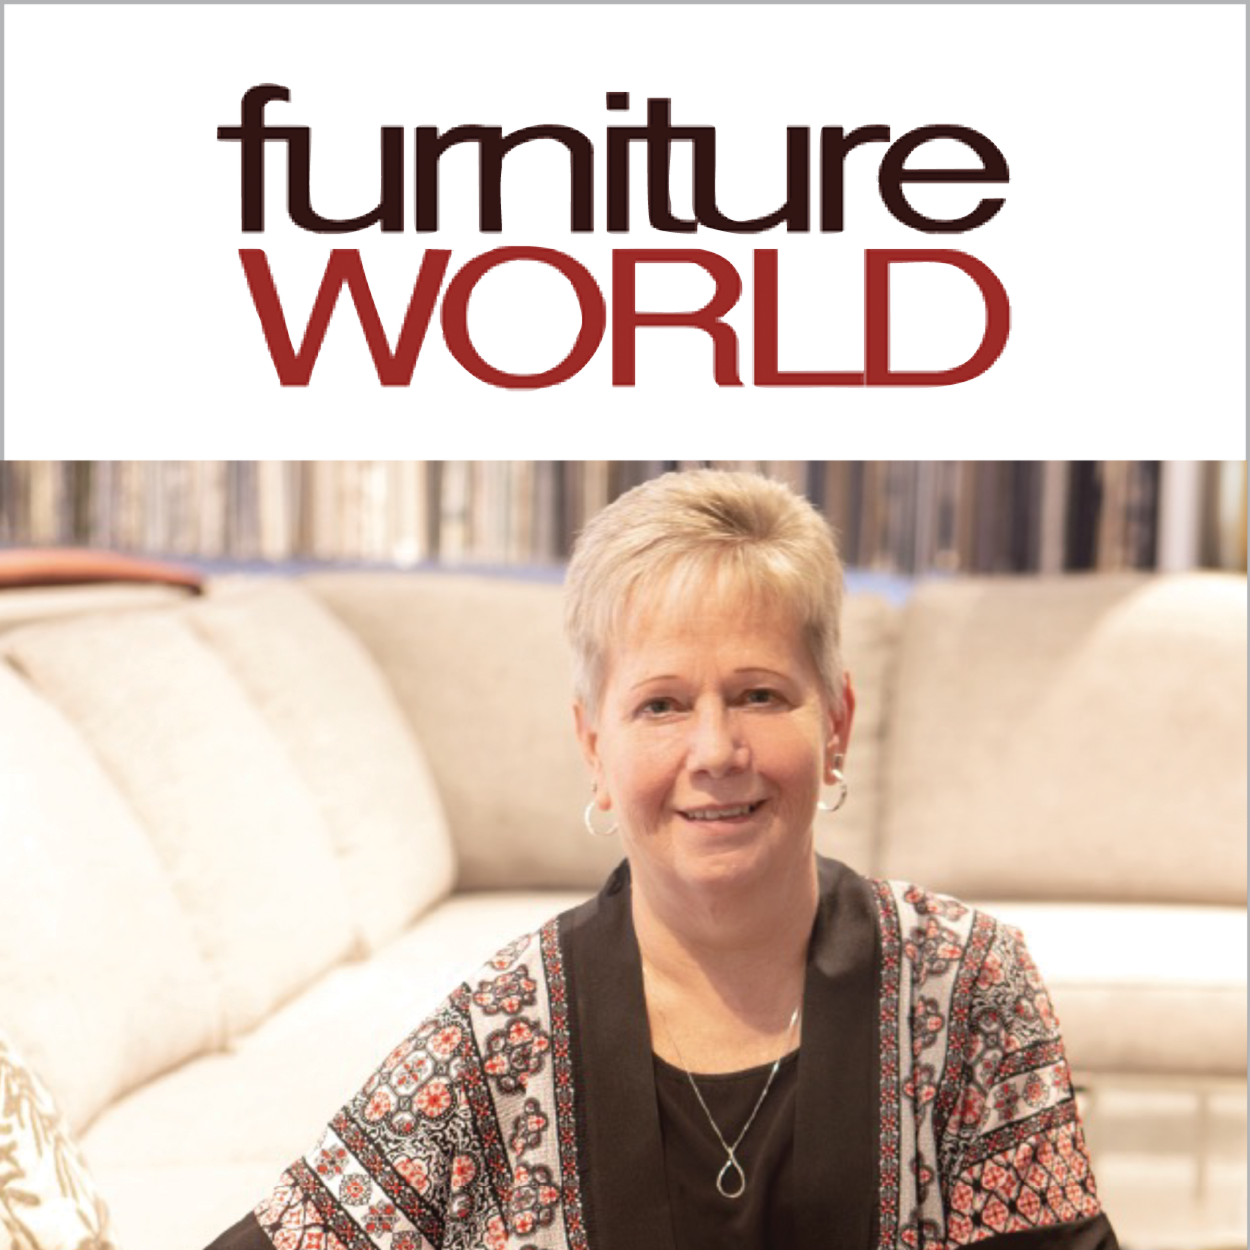 2022 - Karla Niemiec promoted to Upholstery Buyer at Darvin Furniture & Mattress